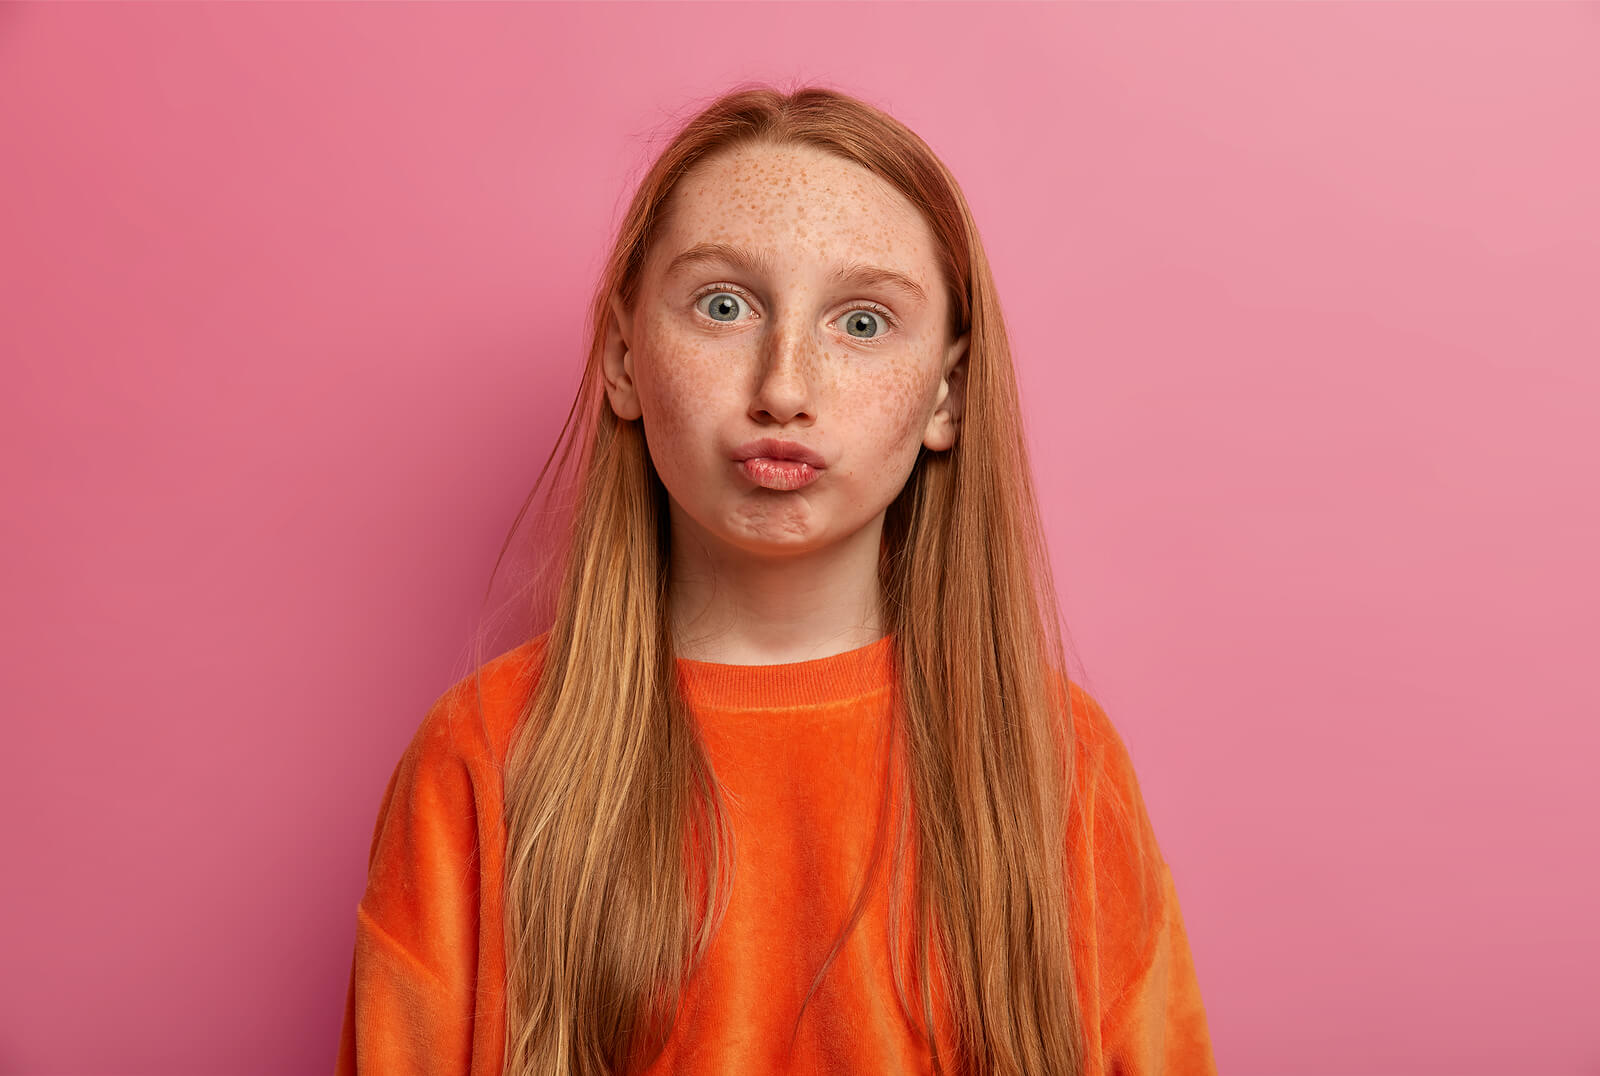 A red-headed teen with freckles.